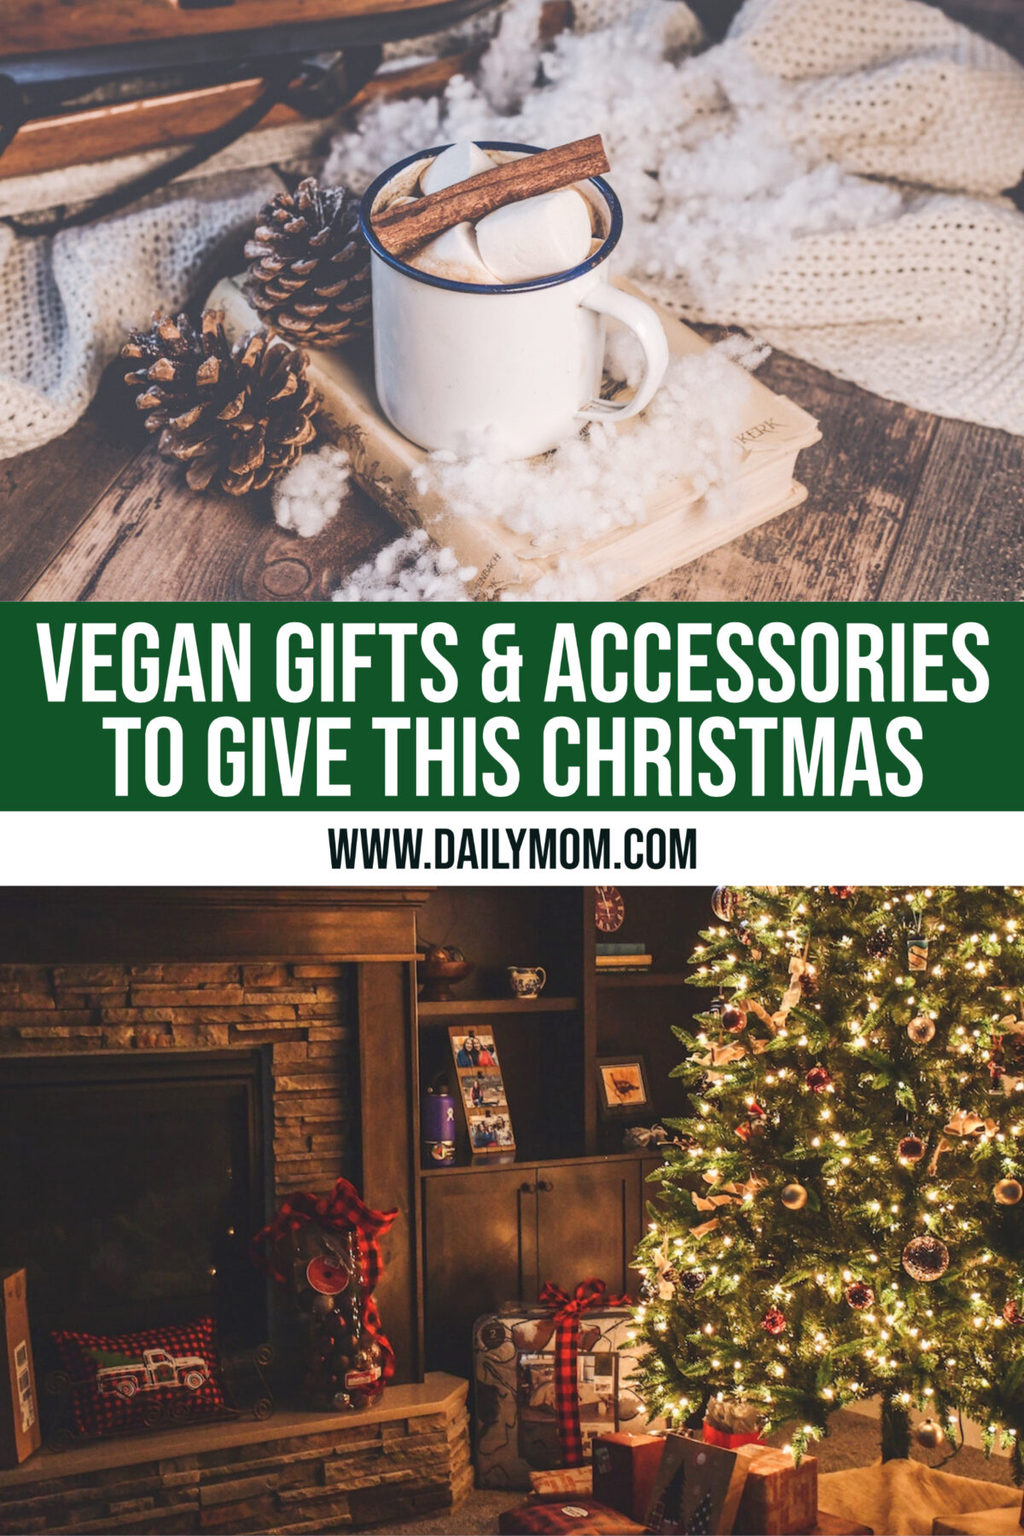 11 Vegan Gifts & Accessories To Give This Christmas